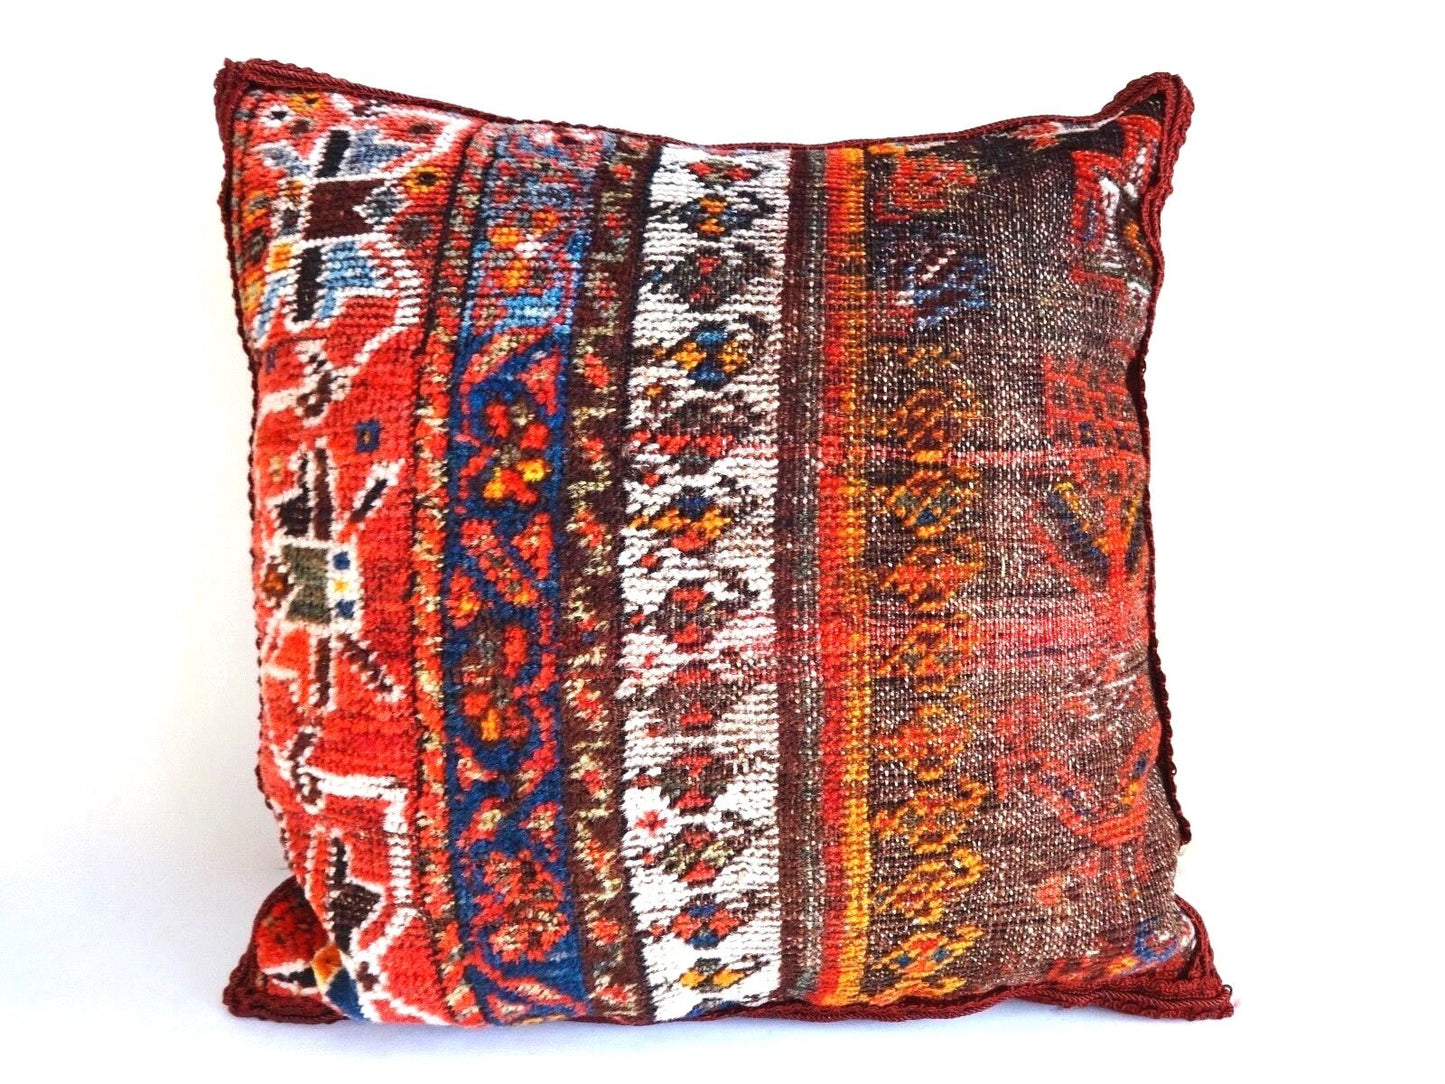 #2024 Superb 19th fragment Tribal Kashqai  Pillow 17" by 17"